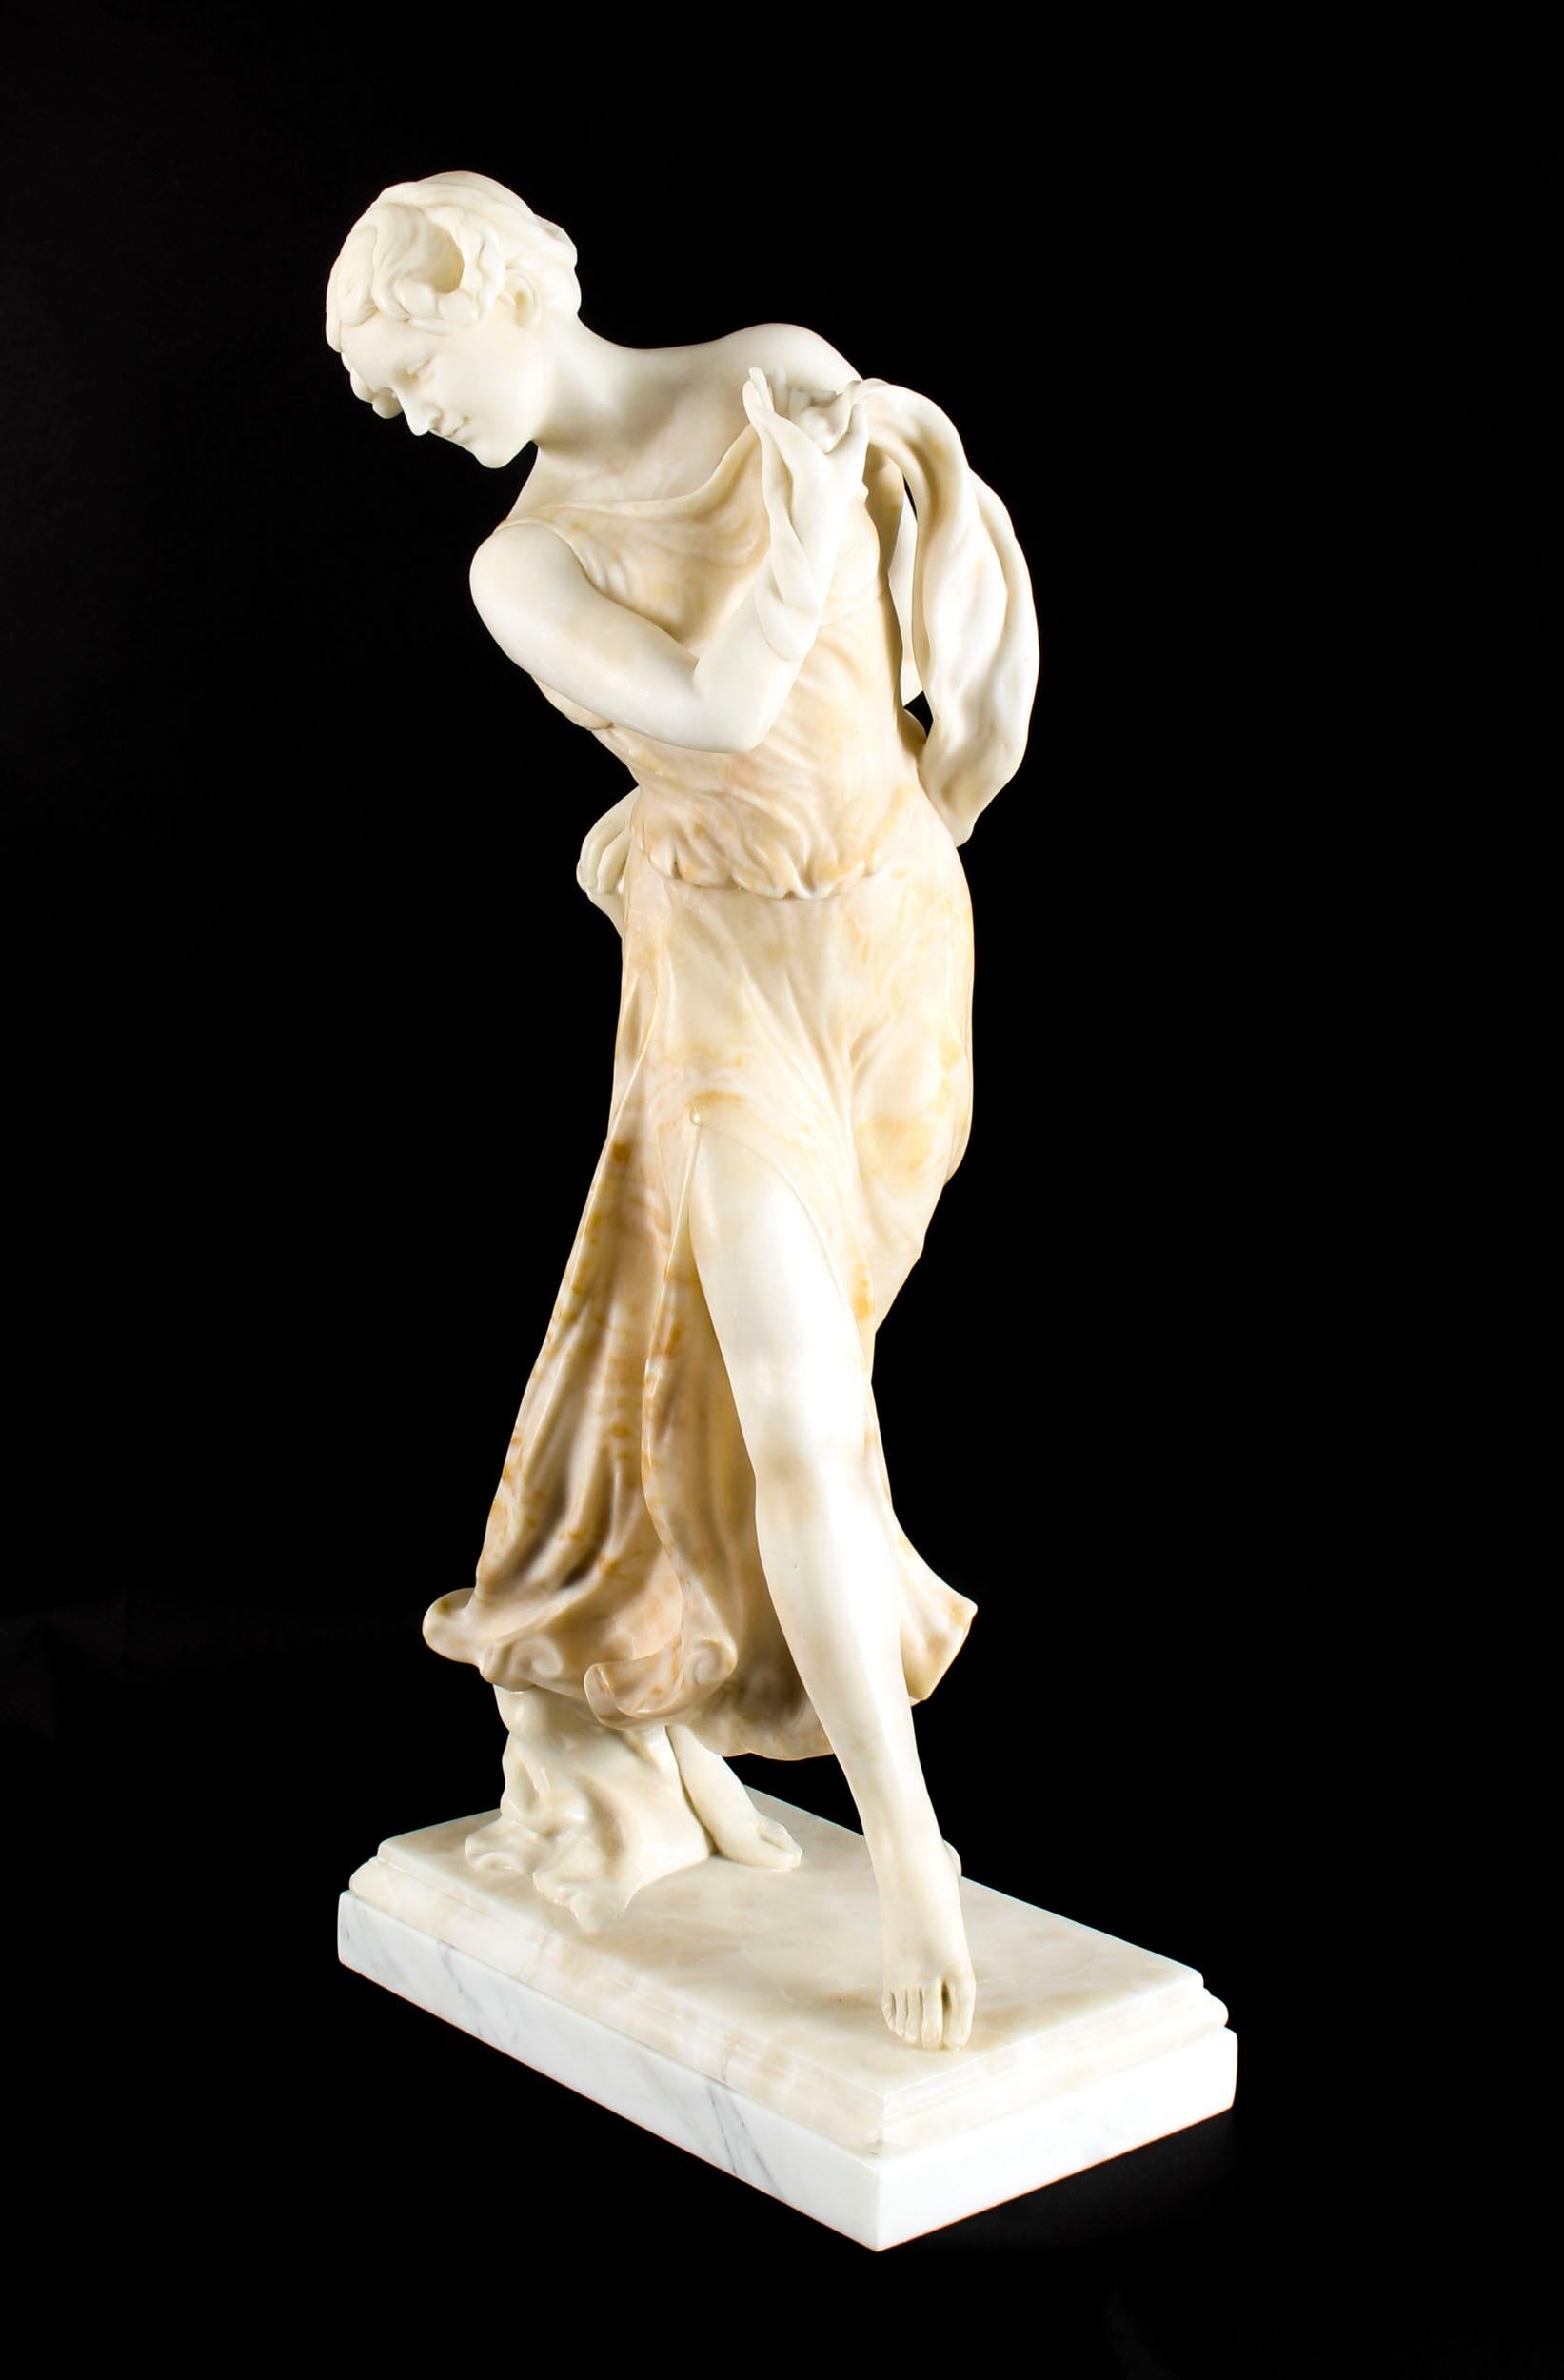 This is a splendid antique French Art Nouveau snow-white and red alabaster sculpture of a graceful dancing lady in classical dress on a striking Verde Antico marble pedestal, circa 1890 in date. 

This finely carved sculpture depicts a beautiful